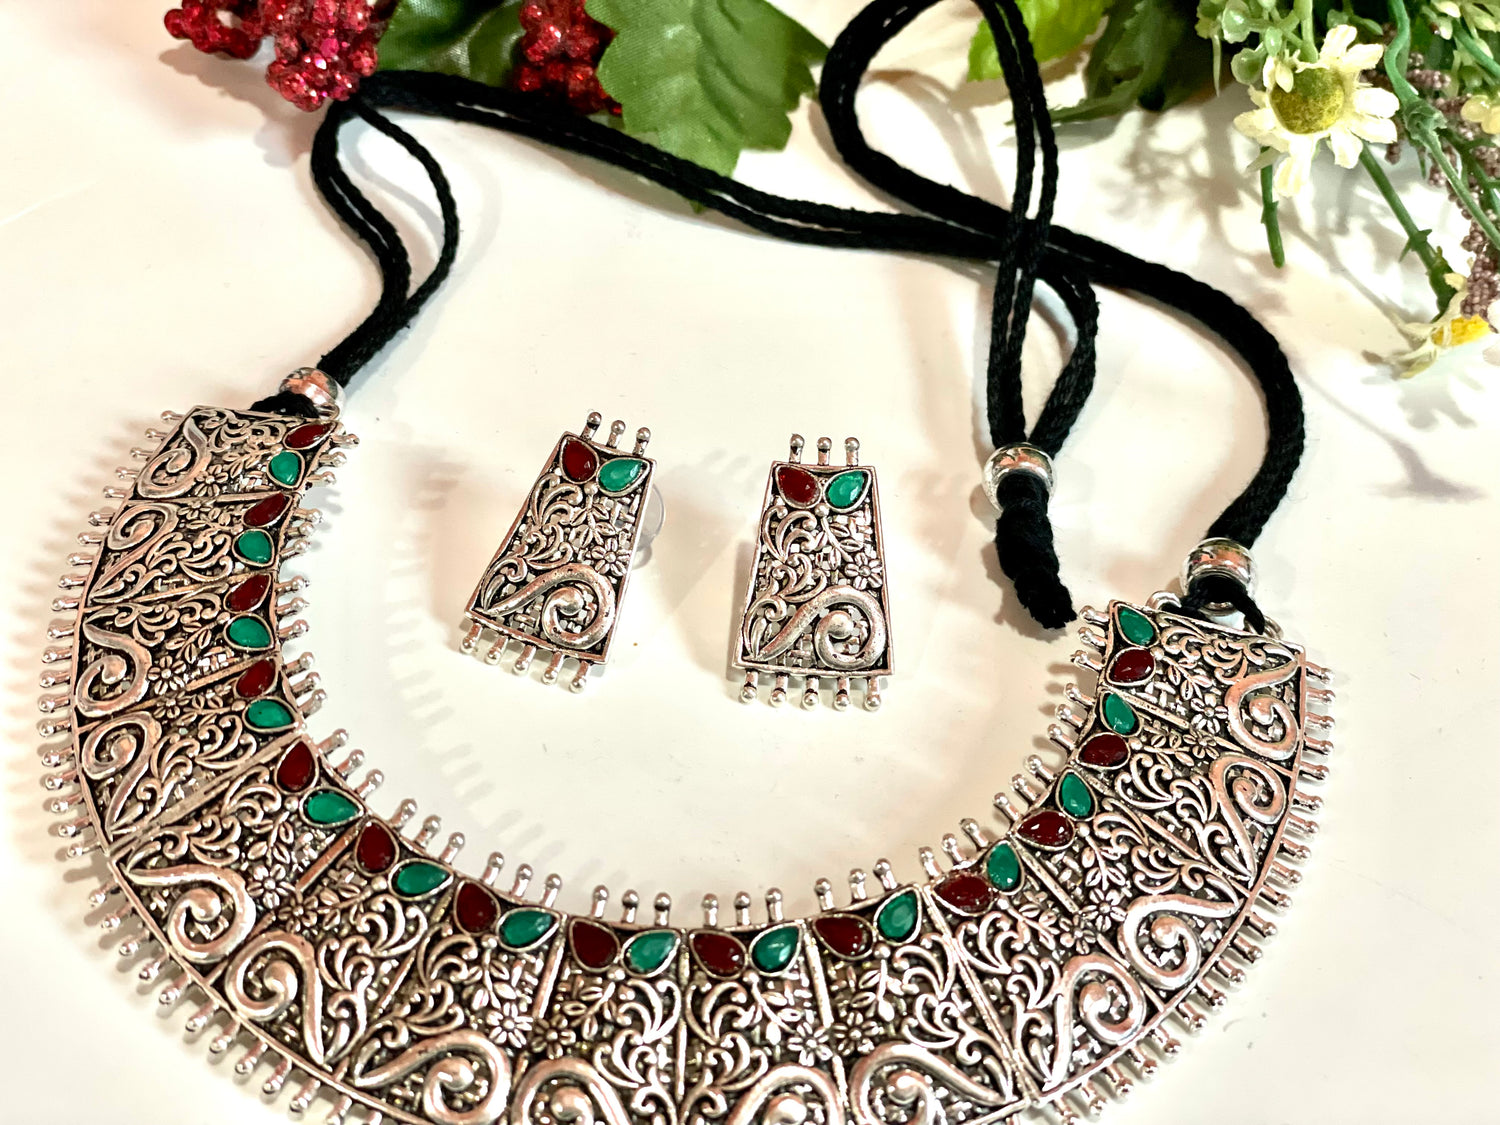 Oxidized necklace earrings adjustable handcrafted jewelry